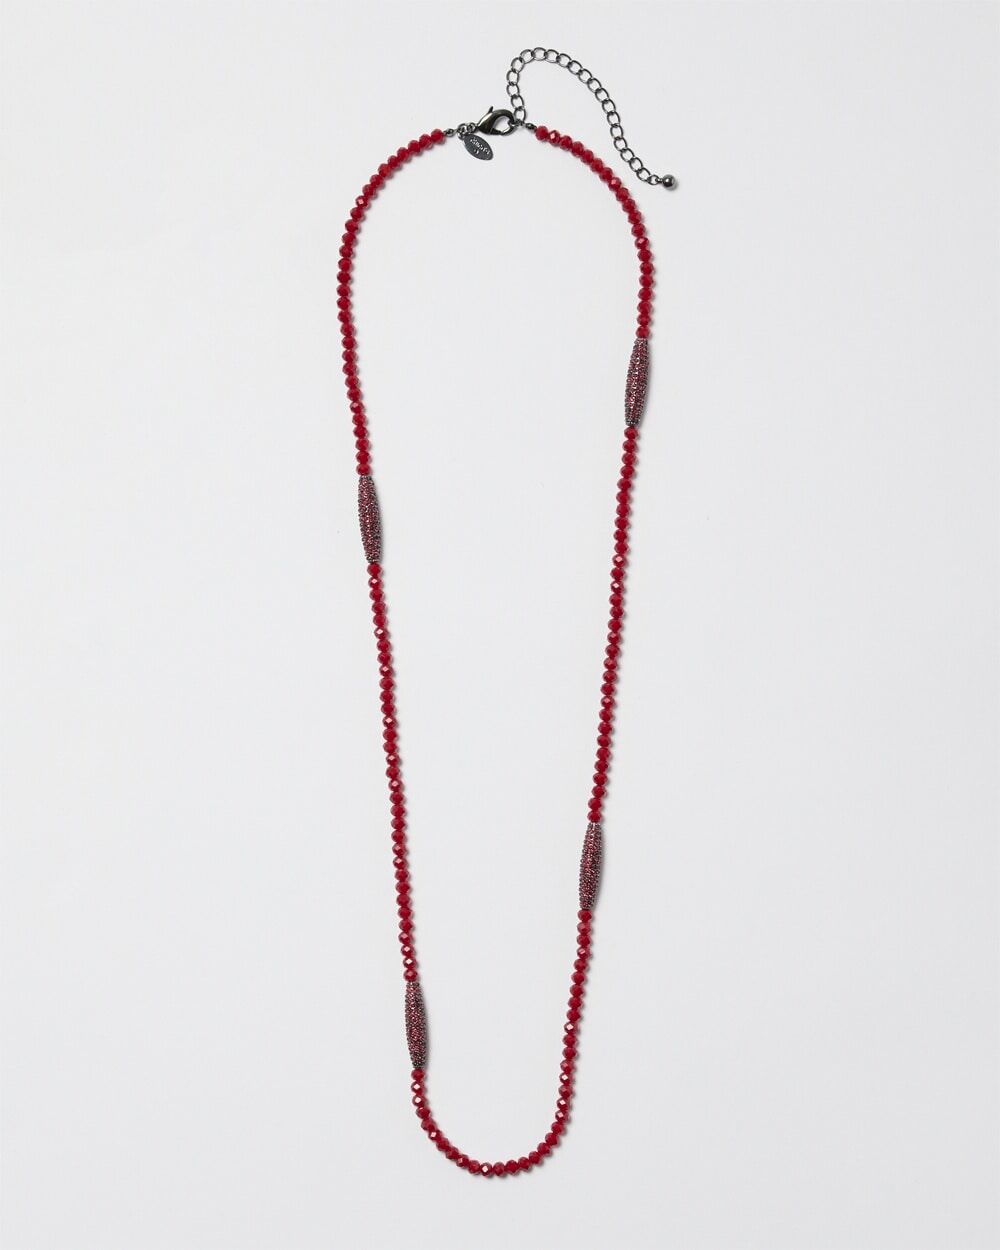 Chico's Off The Rack Women's Red Sparkle Singlestrand Necklace in Rojo Red   Chico's Outlet, Clearance Women's Clothing - Rojo Red - Women - Size: One Size